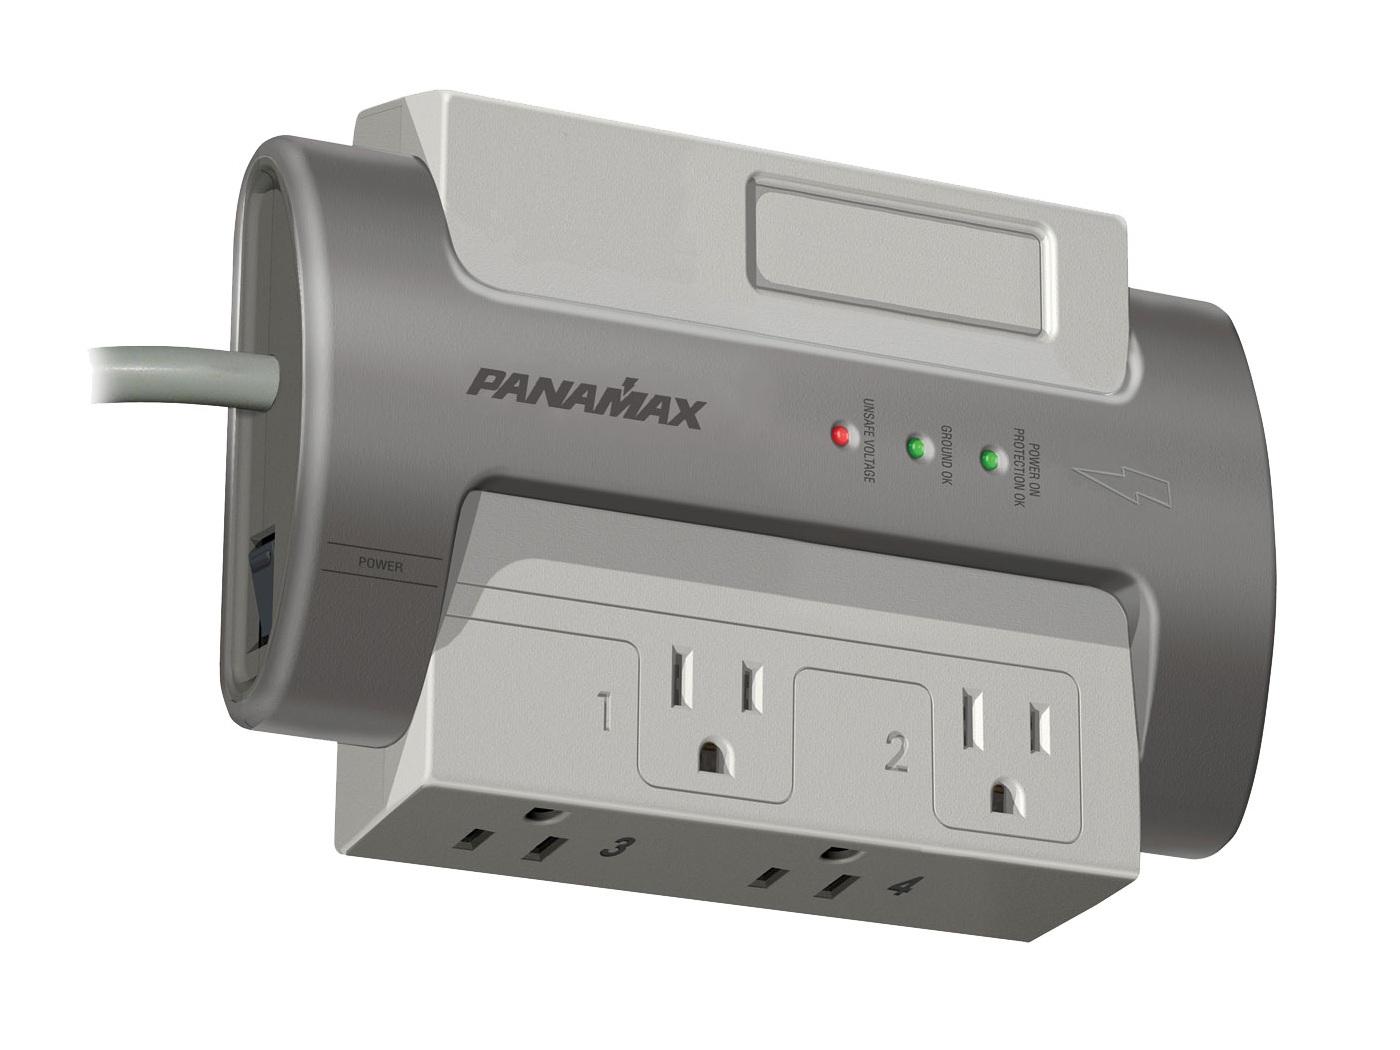 Panamax M4-EX Noise Filtration/Surge Protection For All Home/Office Equipment